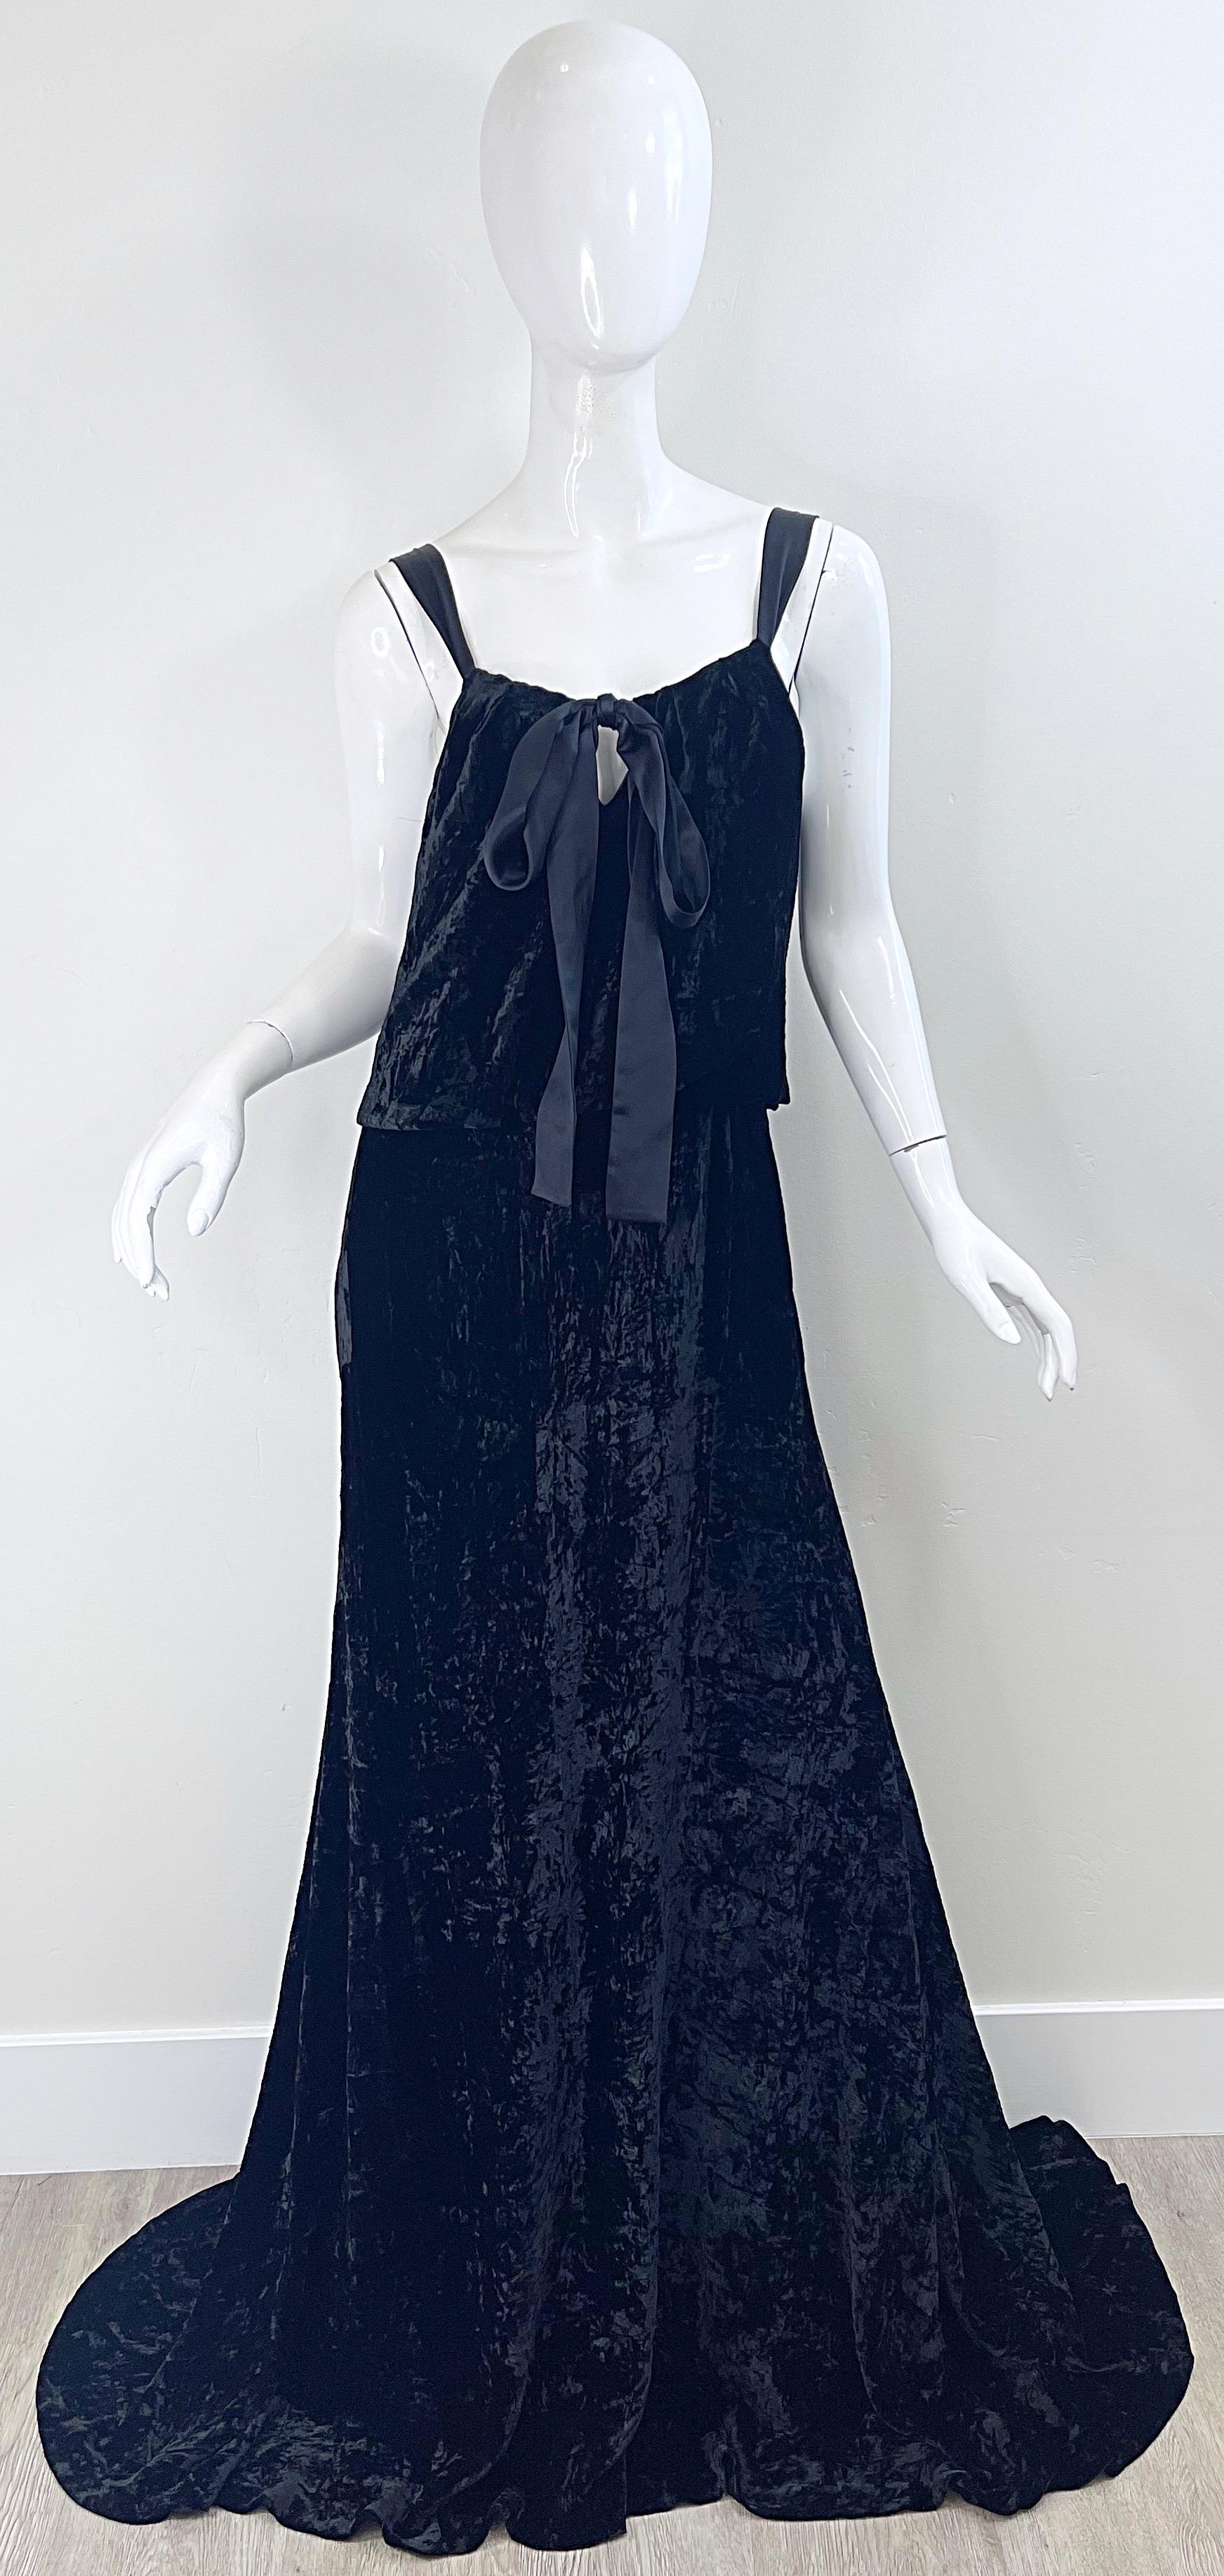 NWT Michael Kors Collection Fall 2006 Runway Size 6-8 Black Crushed Velvet Gown For Sale 11